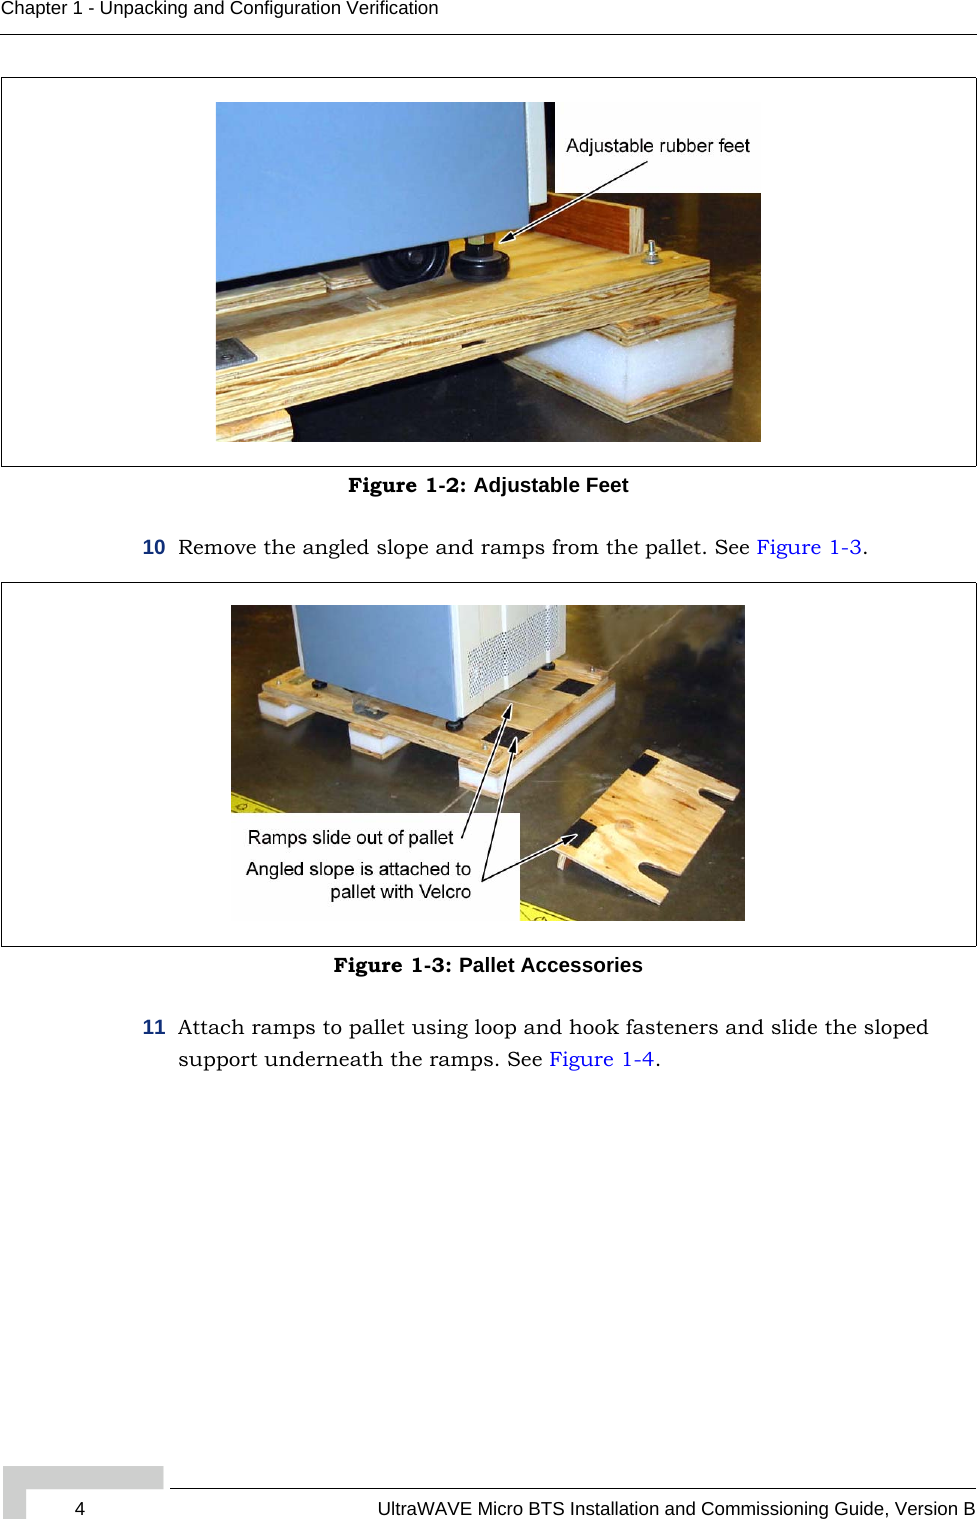 4 UltraWAVE Micro BTS Installation and Commissioning Guide, Version BChapter 1 - Unpacking and Configuration Verification10 Remove the angled slope and ramps from the pallet. See Figure 1-3.11 Attach ramps to pallet using loop and hook fasteners and slide the sloped support underneath the ramps. See Figure 1-4.Figure 1-2: Adjustable FeetFigure 1-3: Pallet Accessories